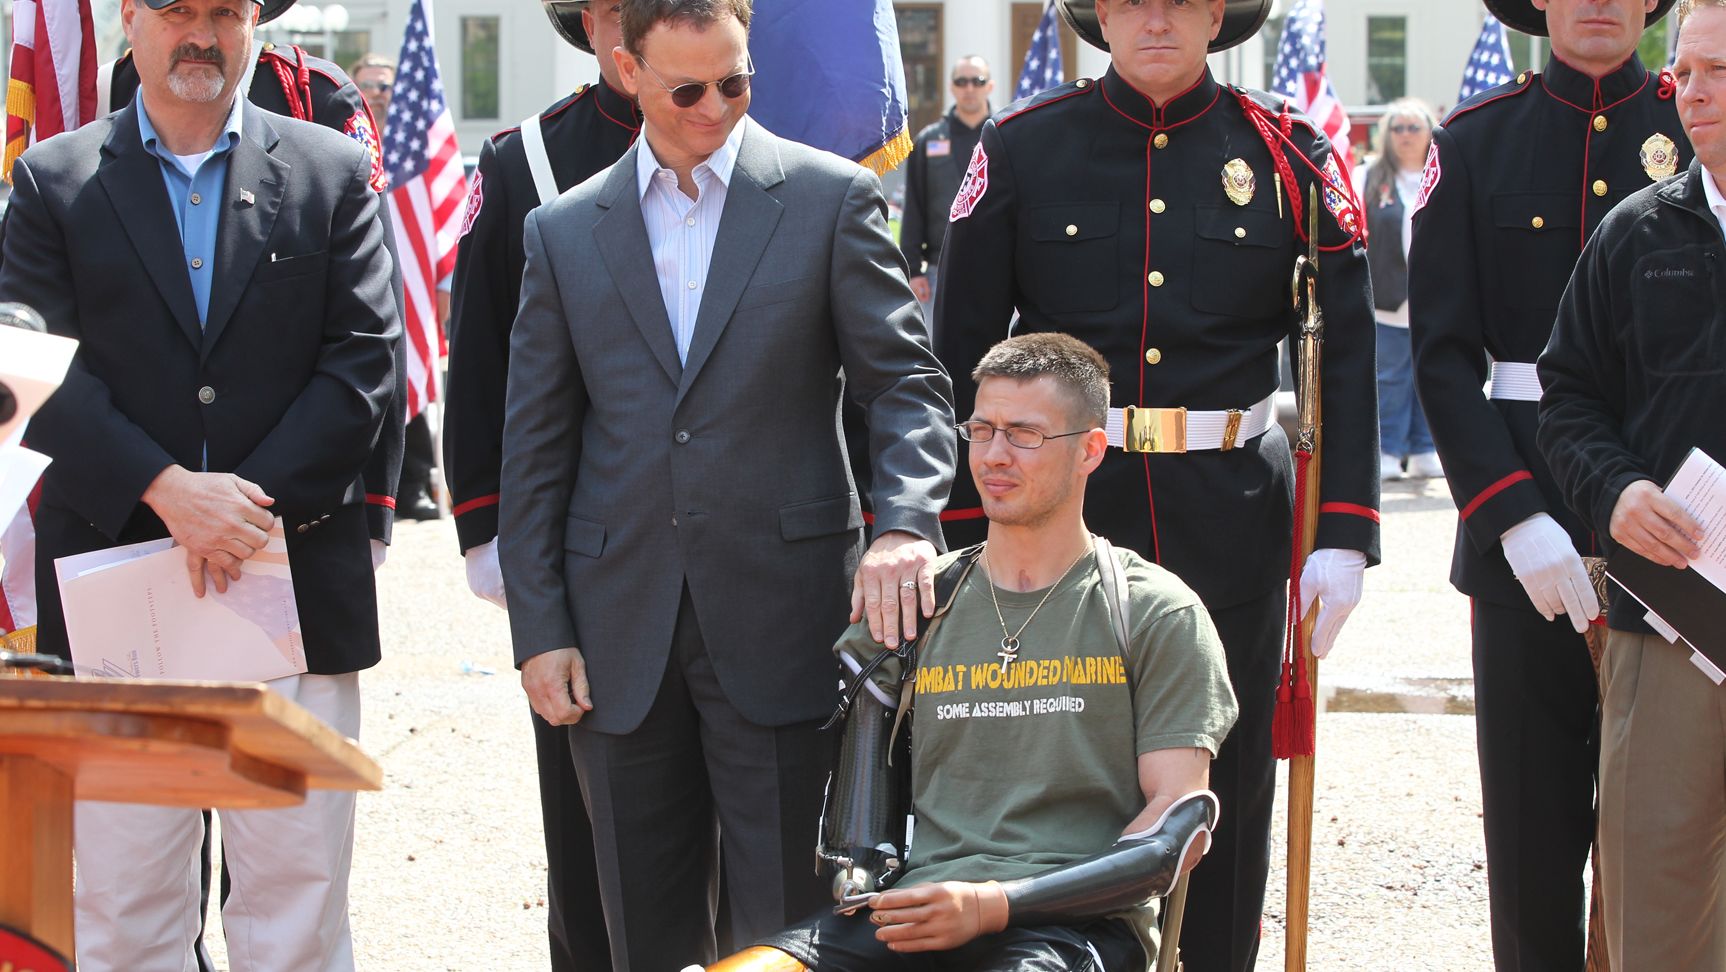 Frank Siller, left, and Gary Sinise, center, announce a concert to raise money for quadruple amputee vet Todd Nicely.